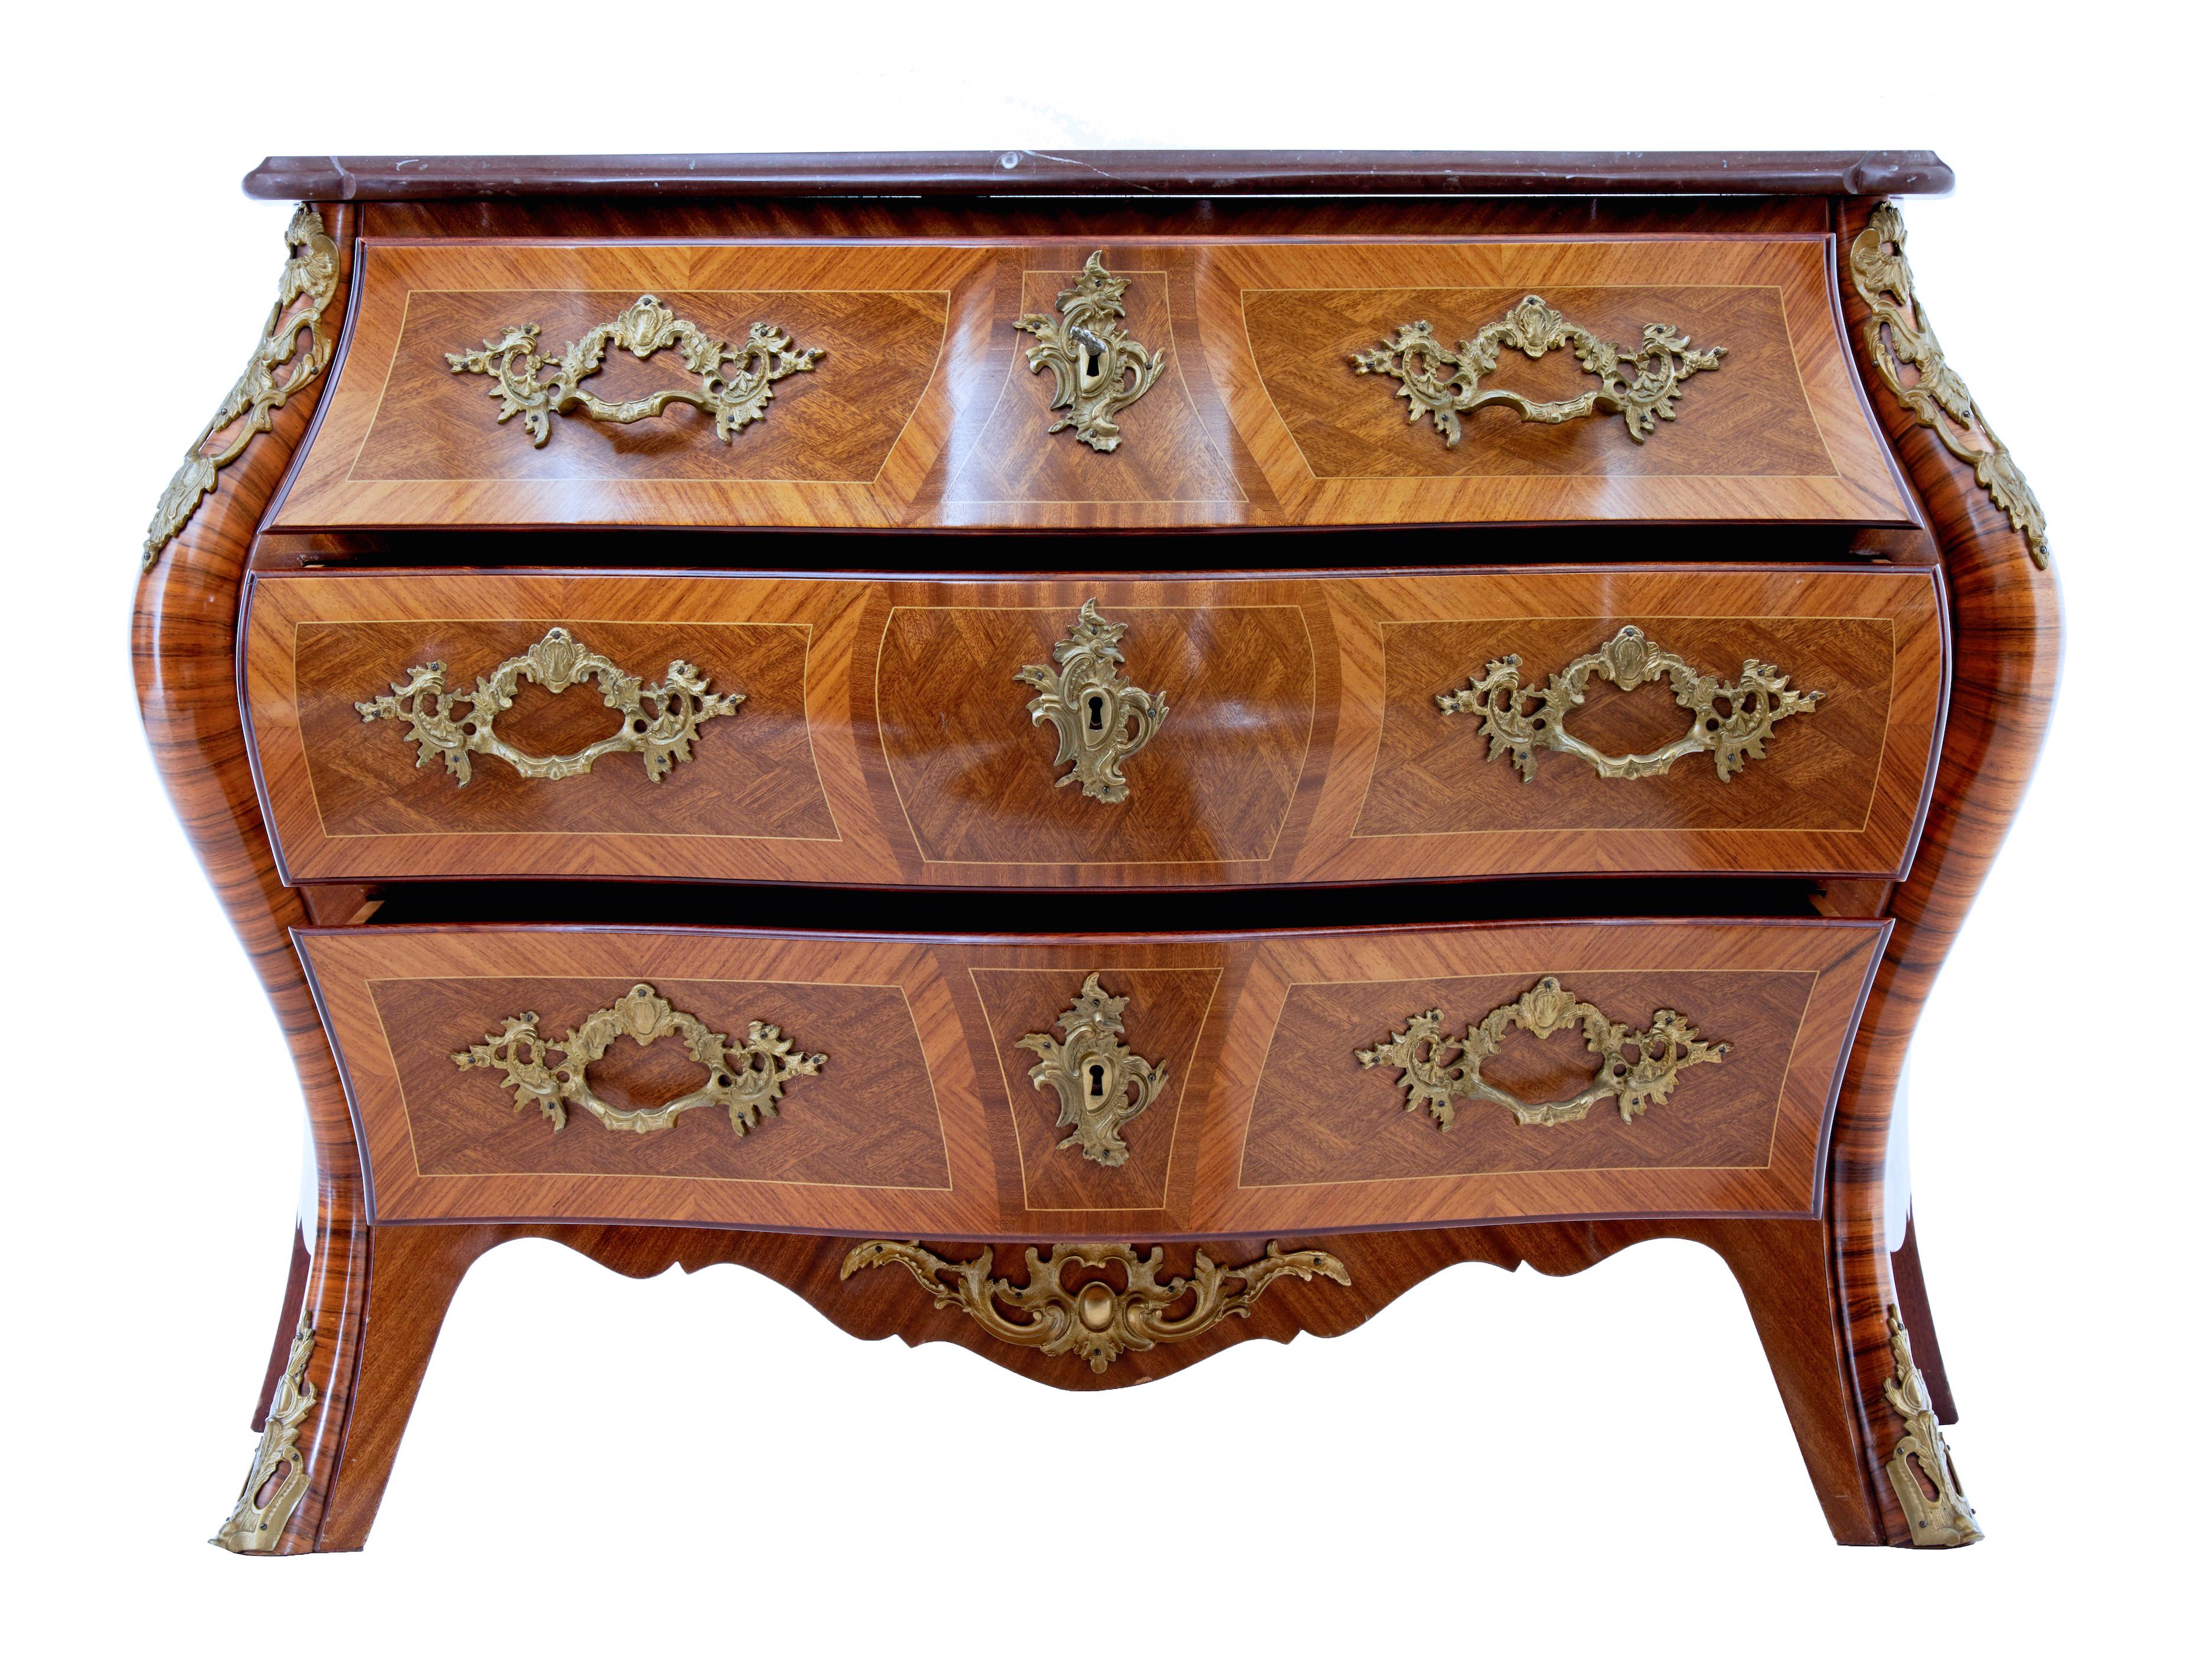 Mid 20th century rococo revival bombe kingwood mahogany chest of drawers circa 1960.

Excellent quality commode by A.B Rococo Mobler. Beautifully bombe shaped marble top commode.

Veneered using mahogany, walnut, satinwood and kingwood.